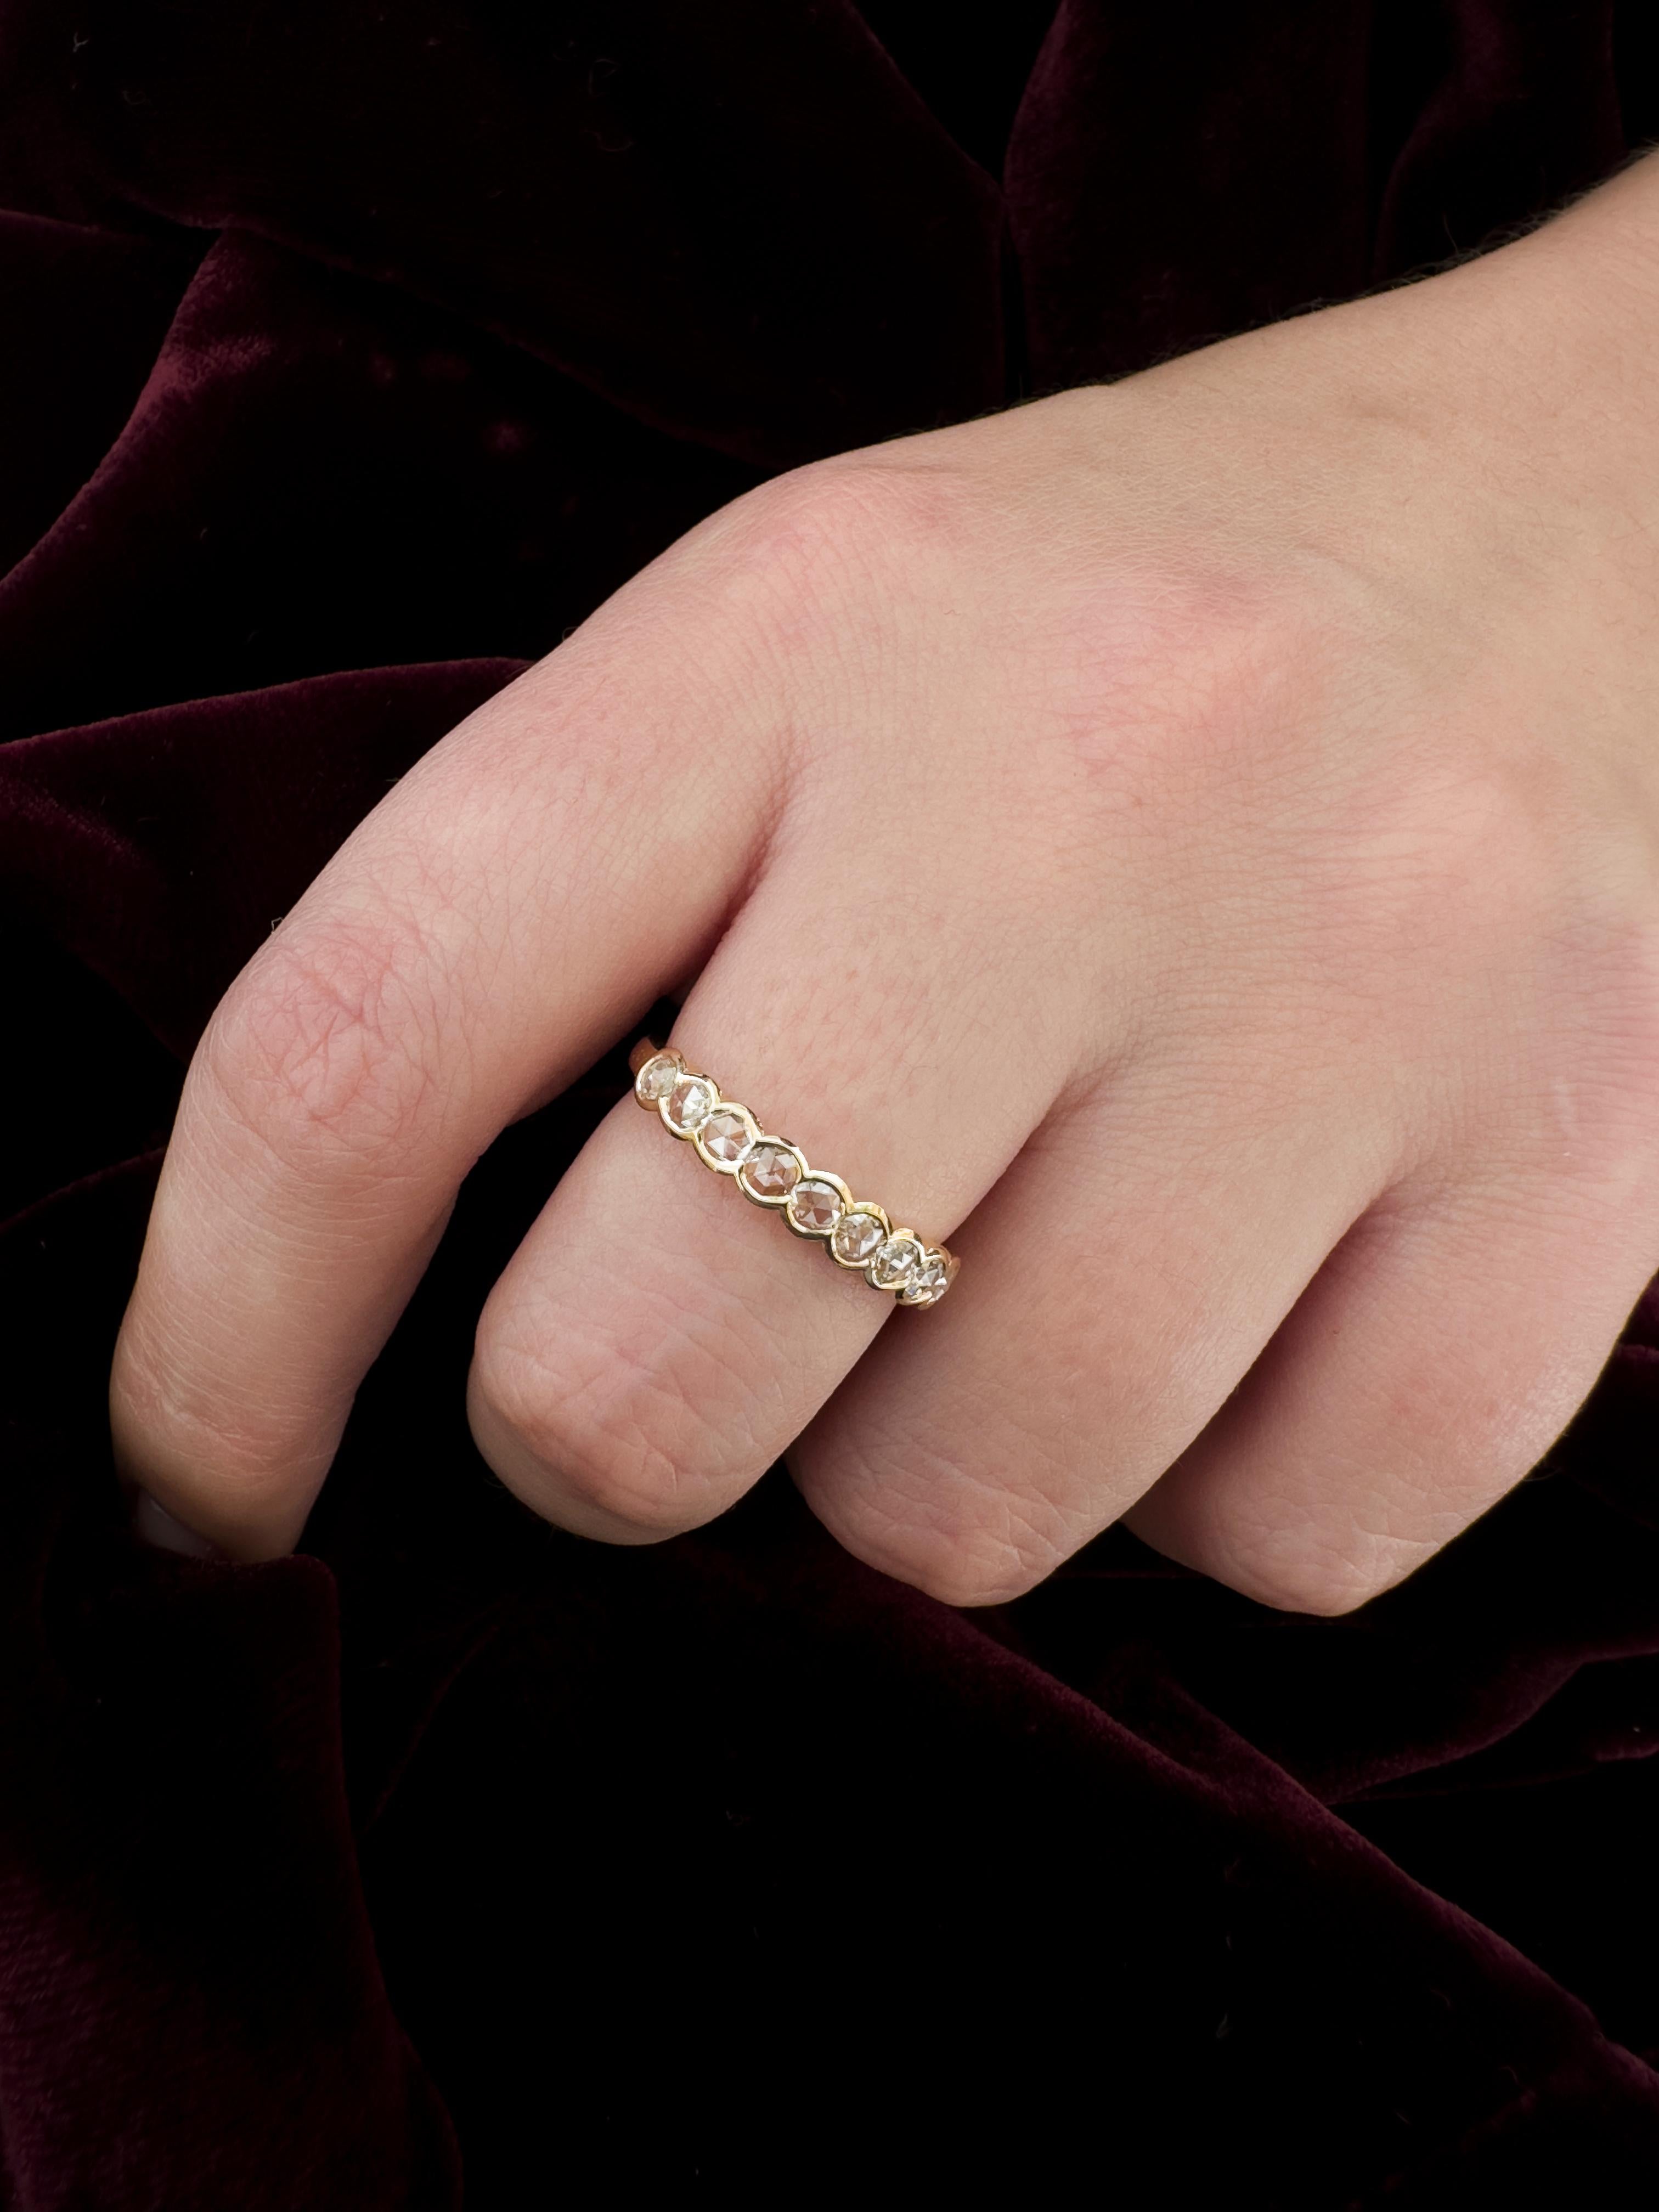 This lovely ring featuring stunning rose cut diamonds is the perfect, understated elegant ring to wear everyday. Part of Aril Jewels' Elizabeth collection, this ring was inspired by the gorgeous gems seen in the Elizabethan jewellery of the